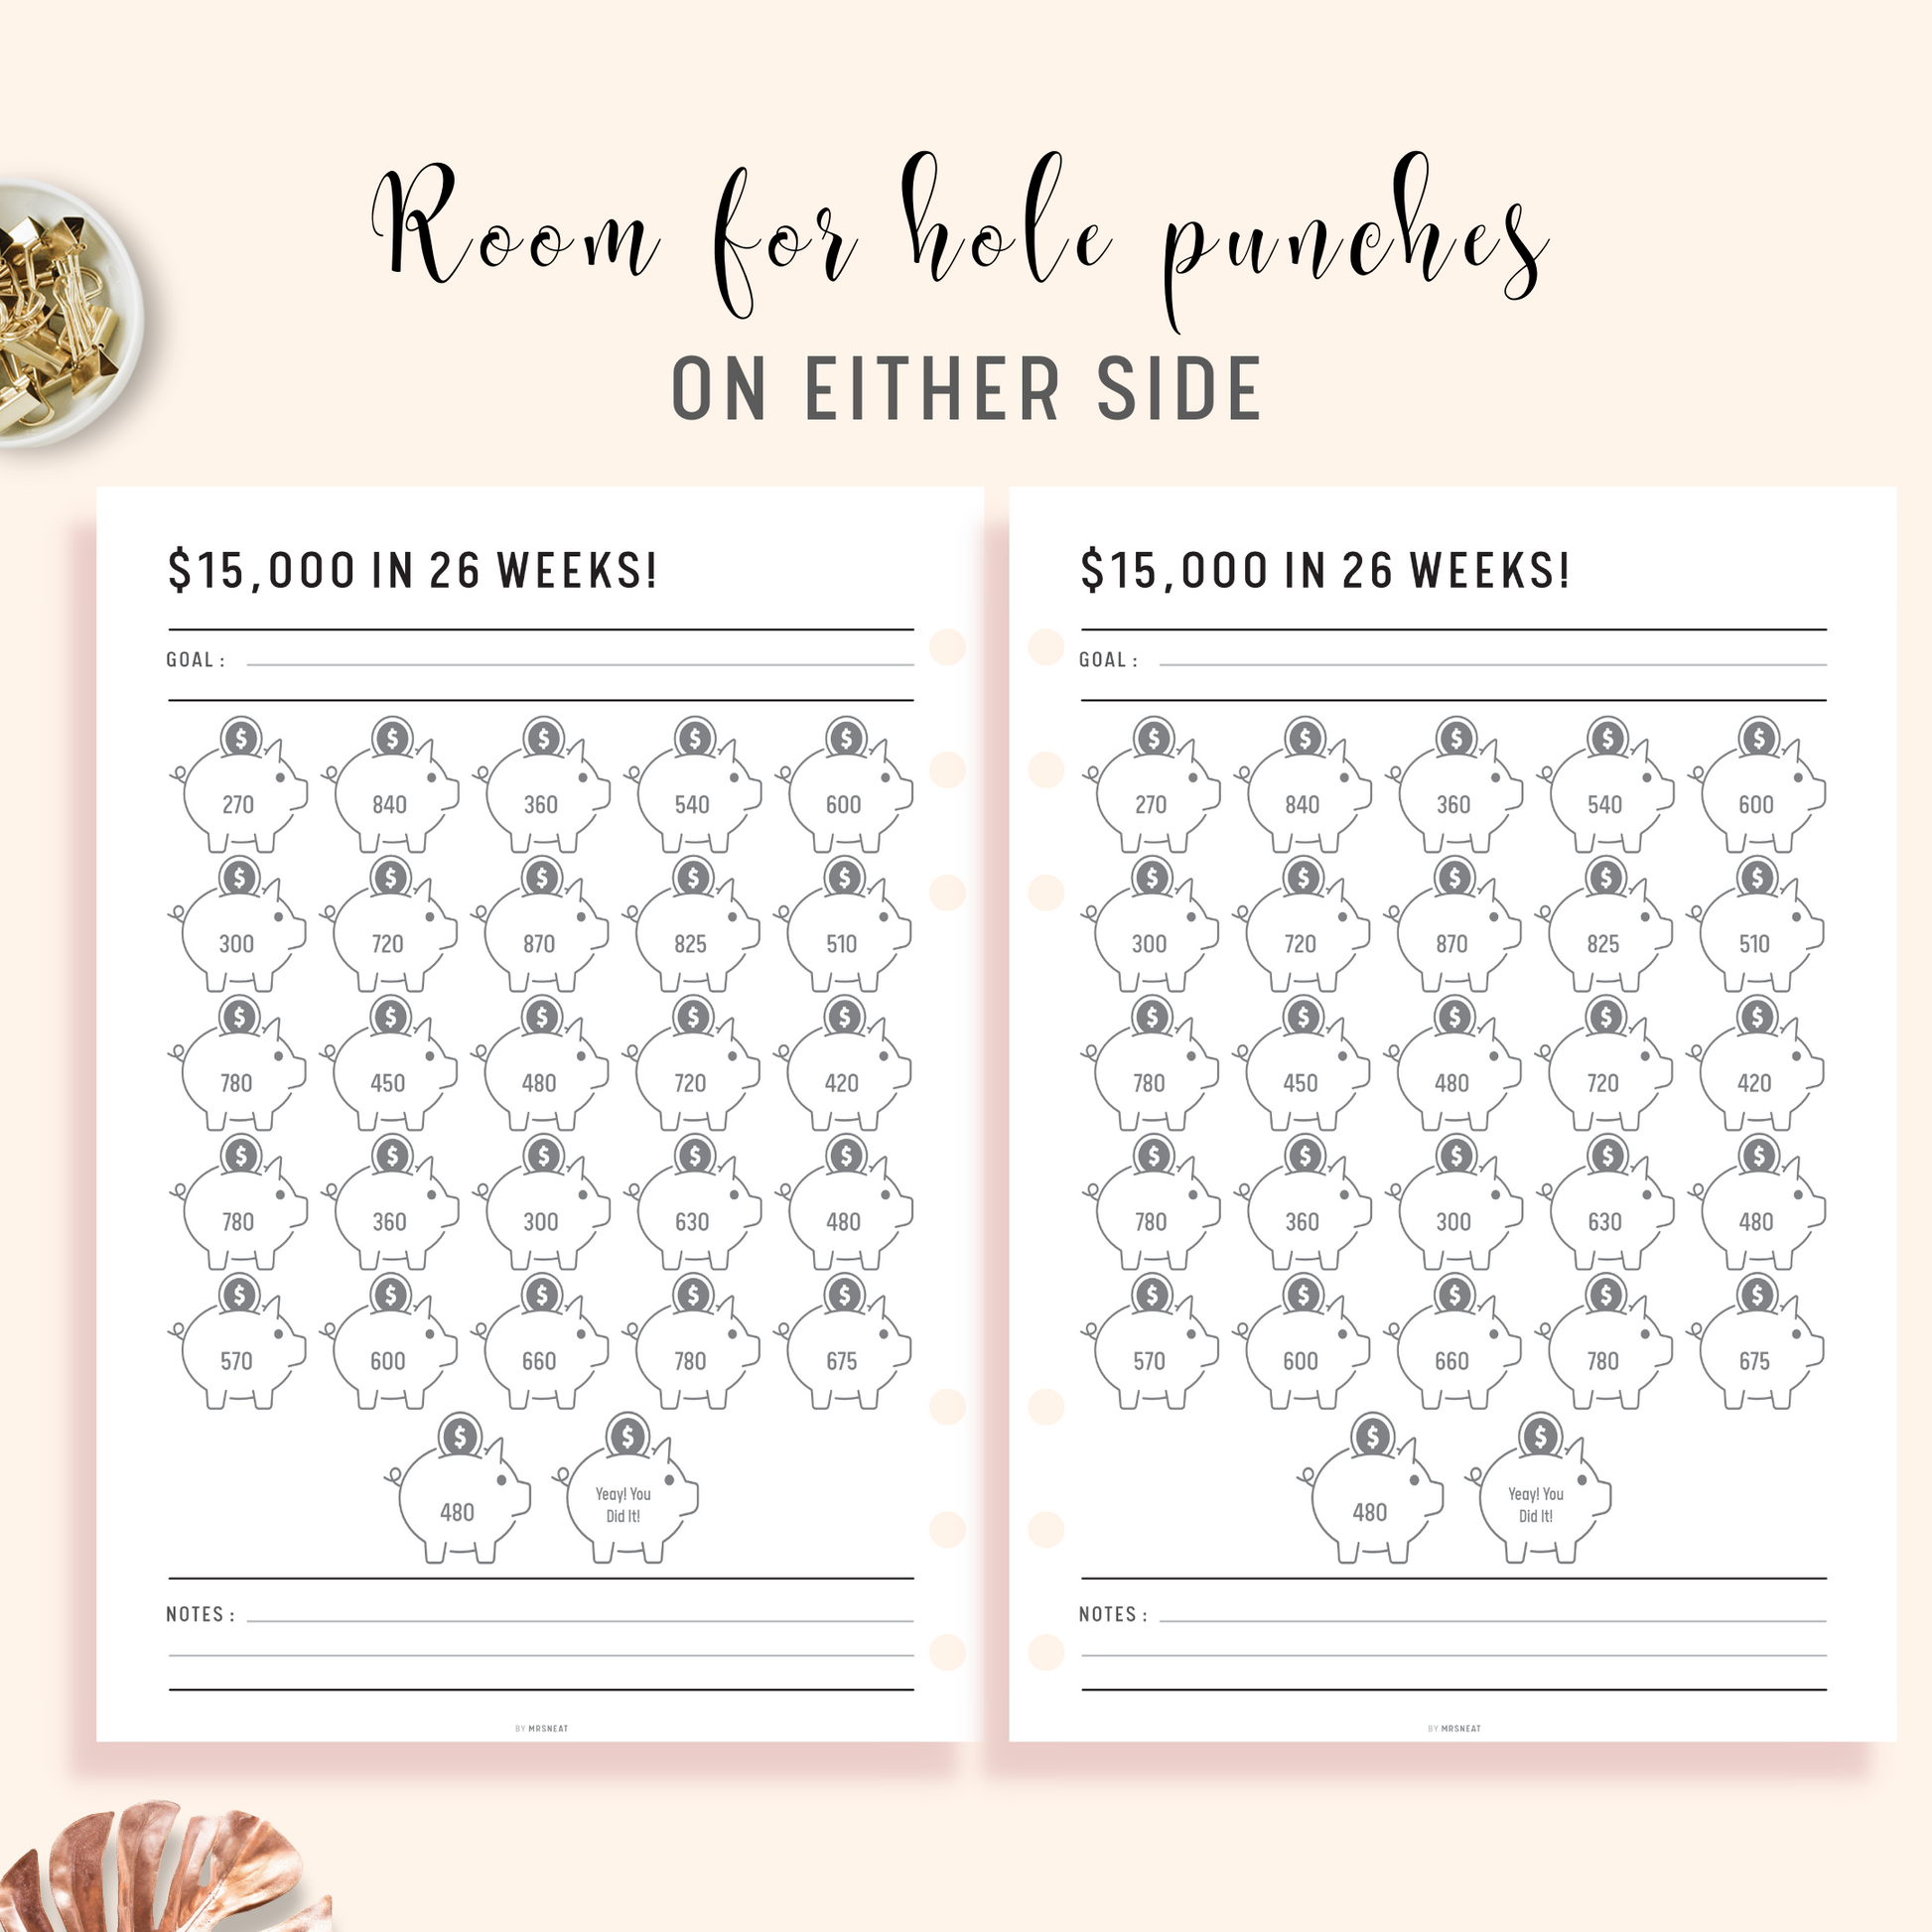 $15,000 Savings Challenge in 26 Weeks Planner with room for hole punches on either side